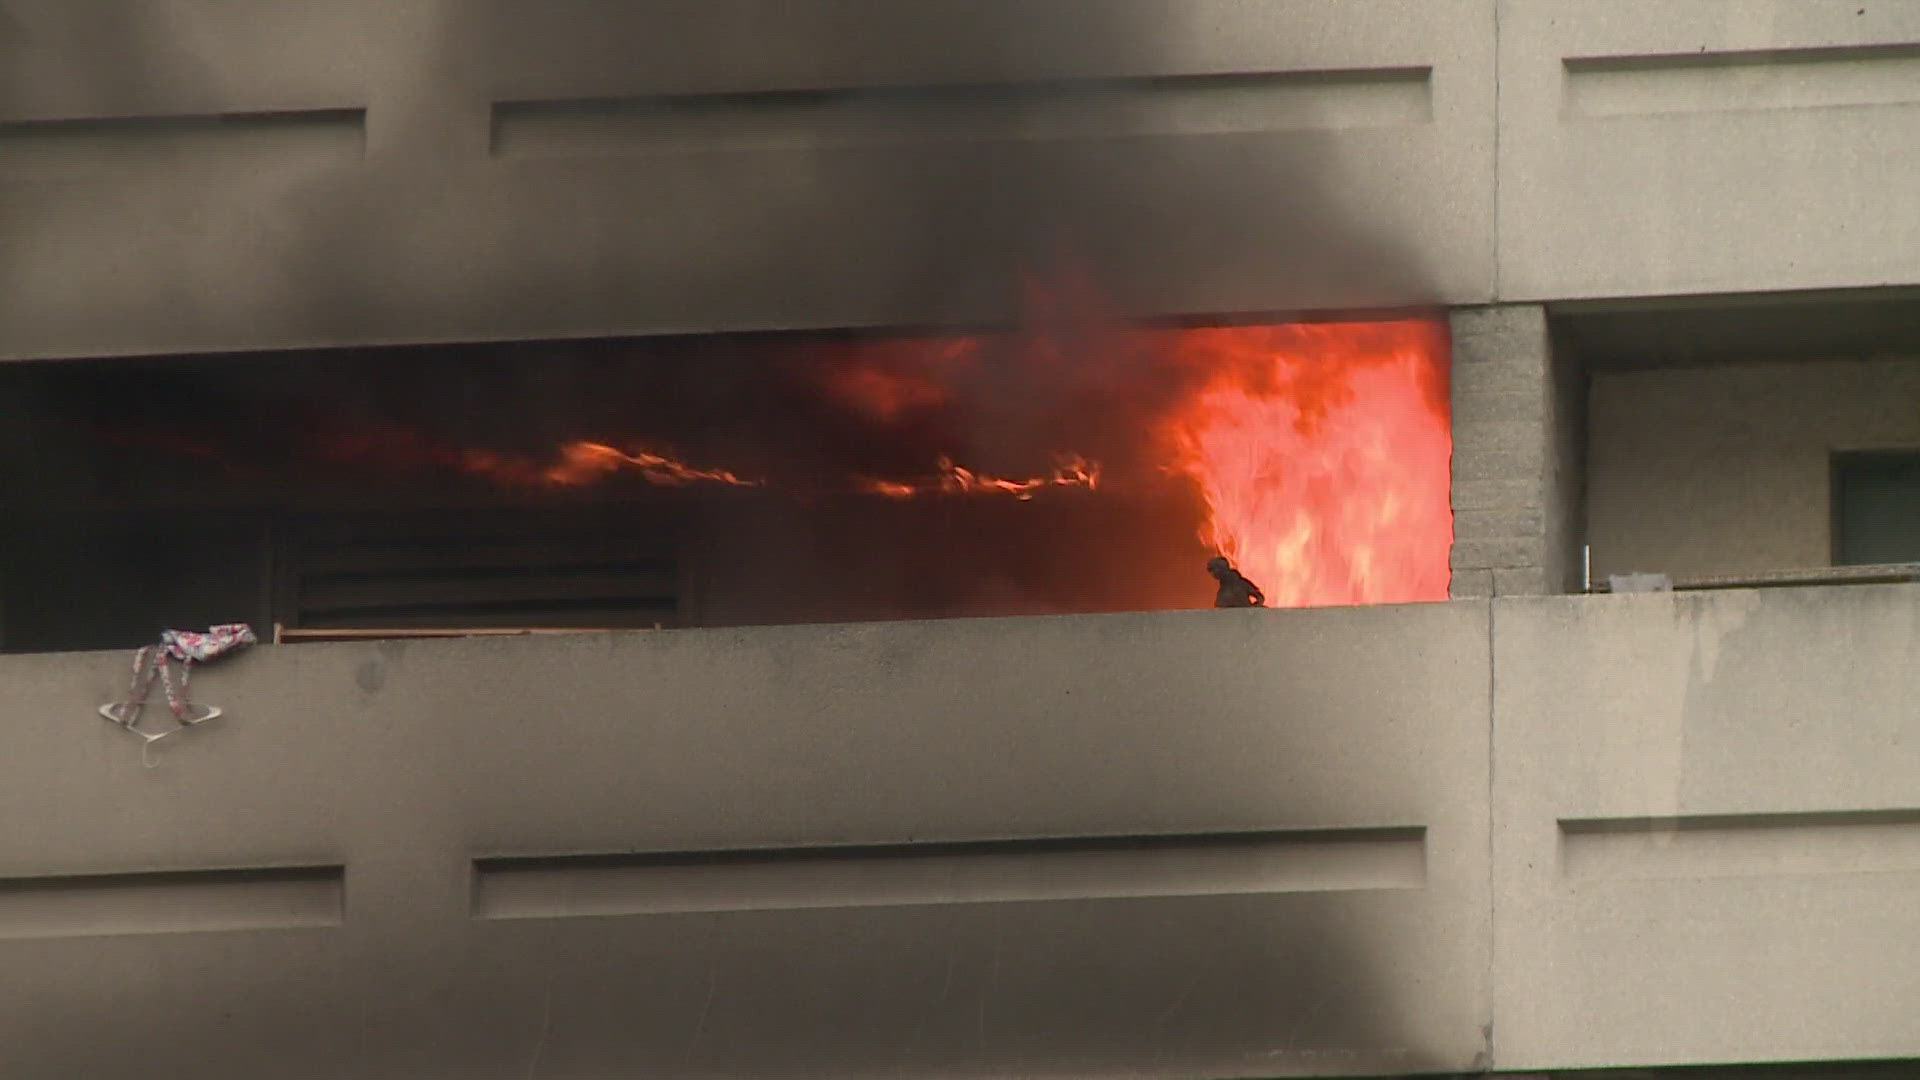 Officials say the blaze broke out around 7 p.m. on the ninth floor of St. Clair Place on East 13th Street.